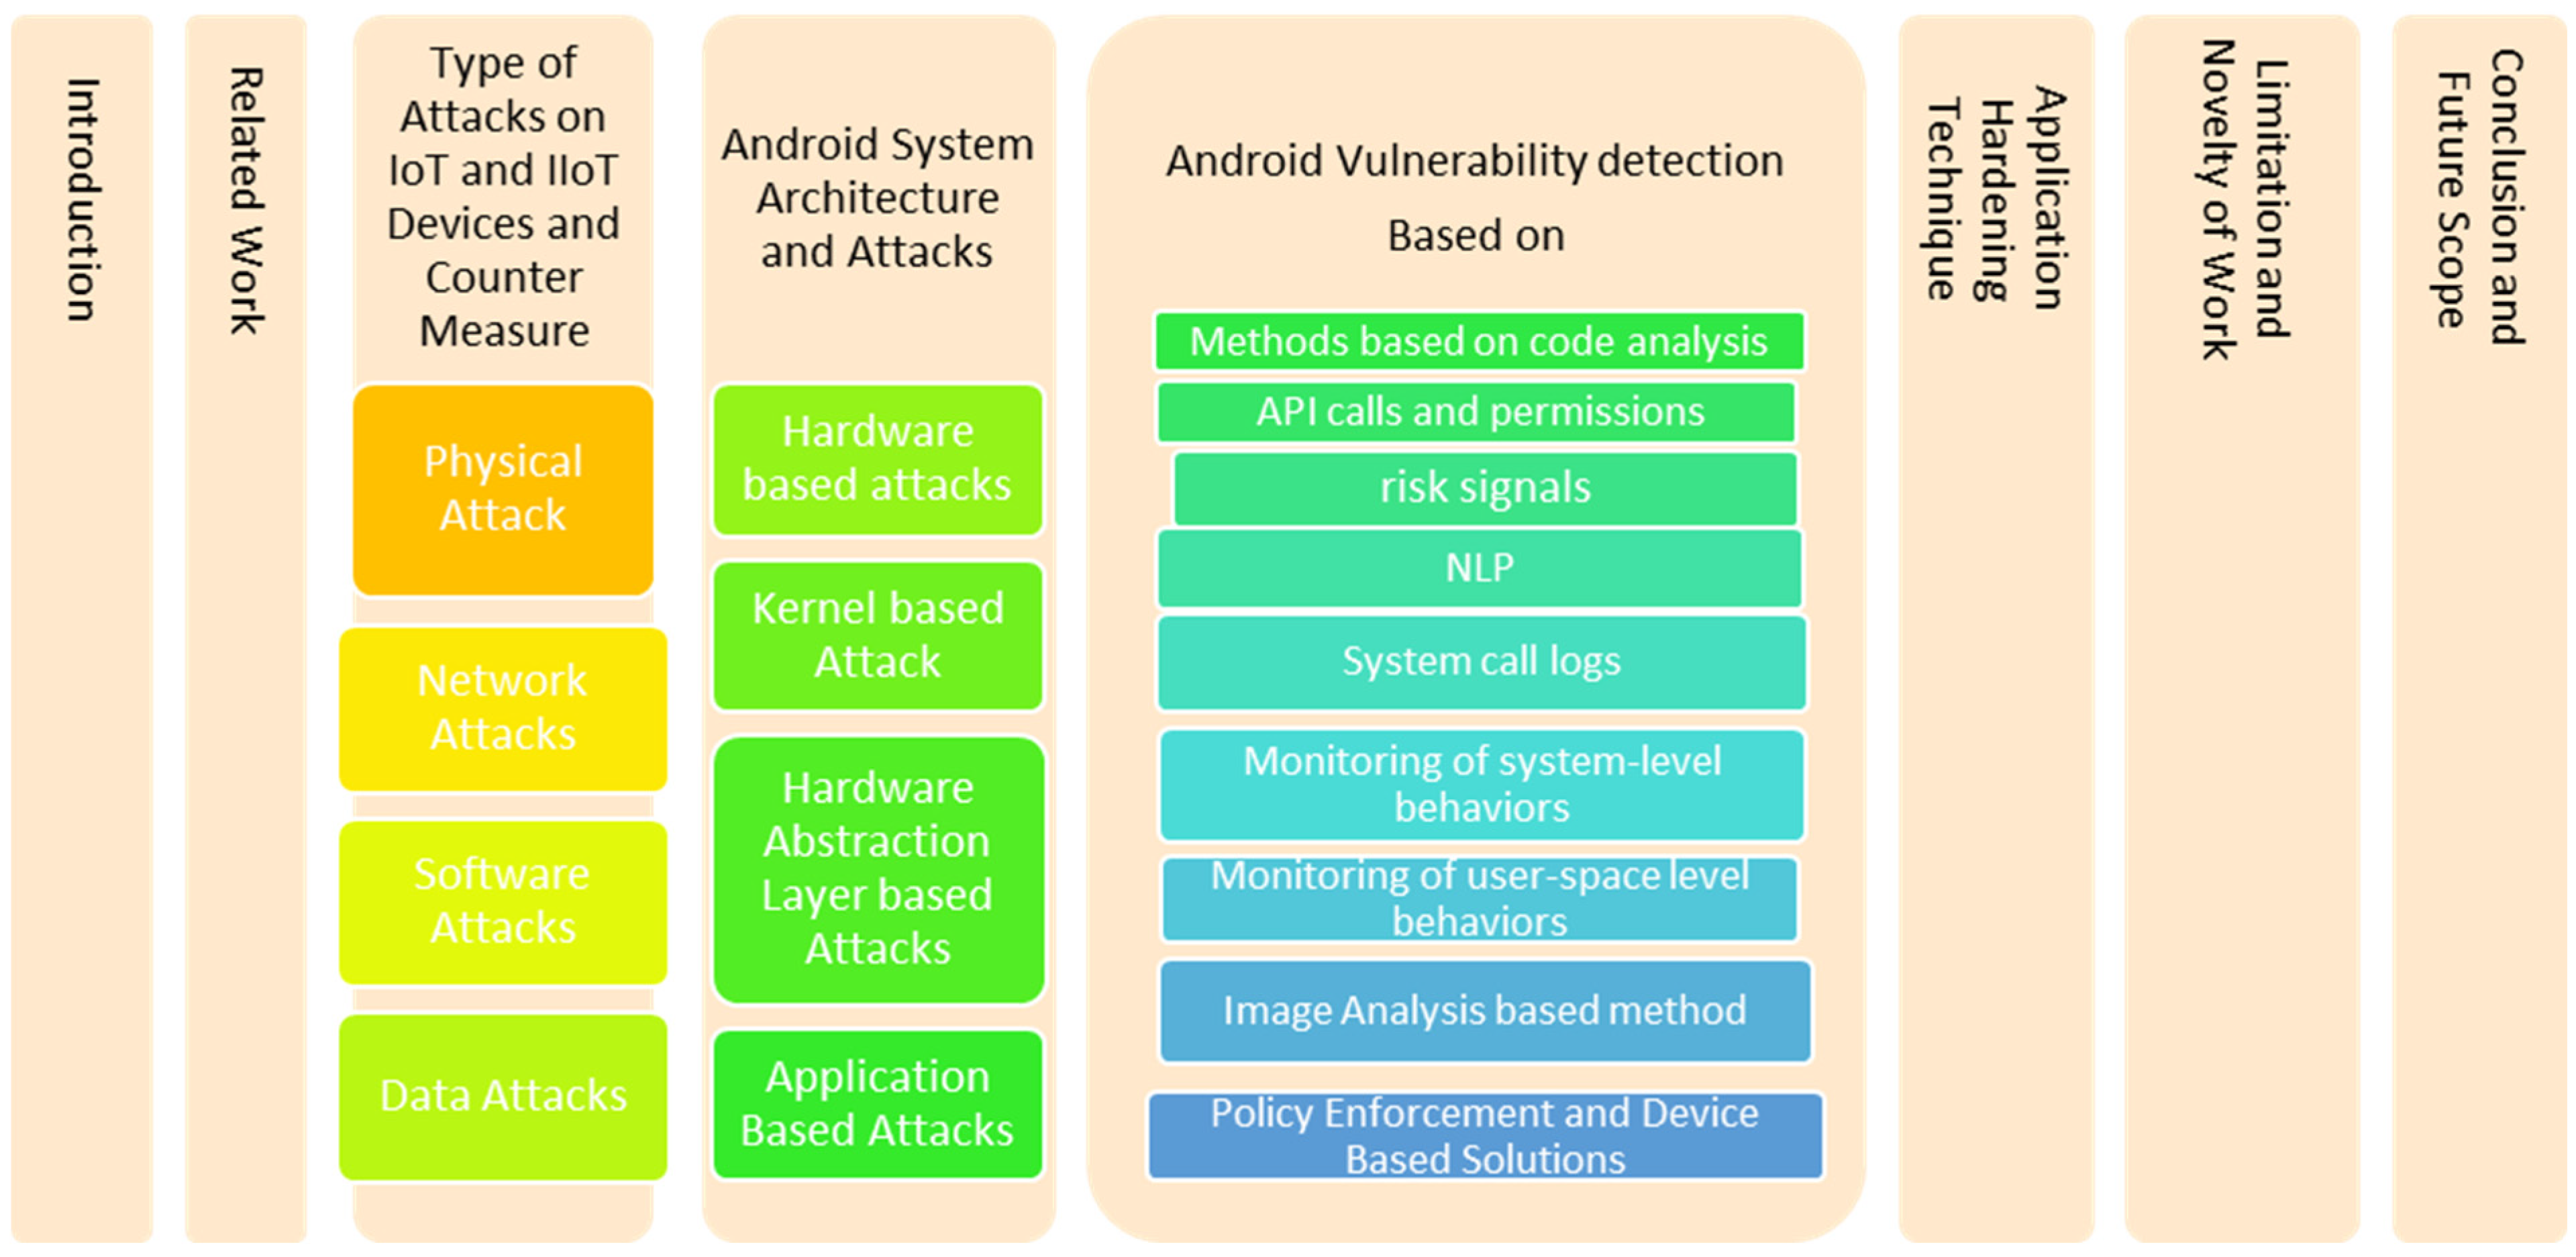 Emerging Defense in Android Kernel